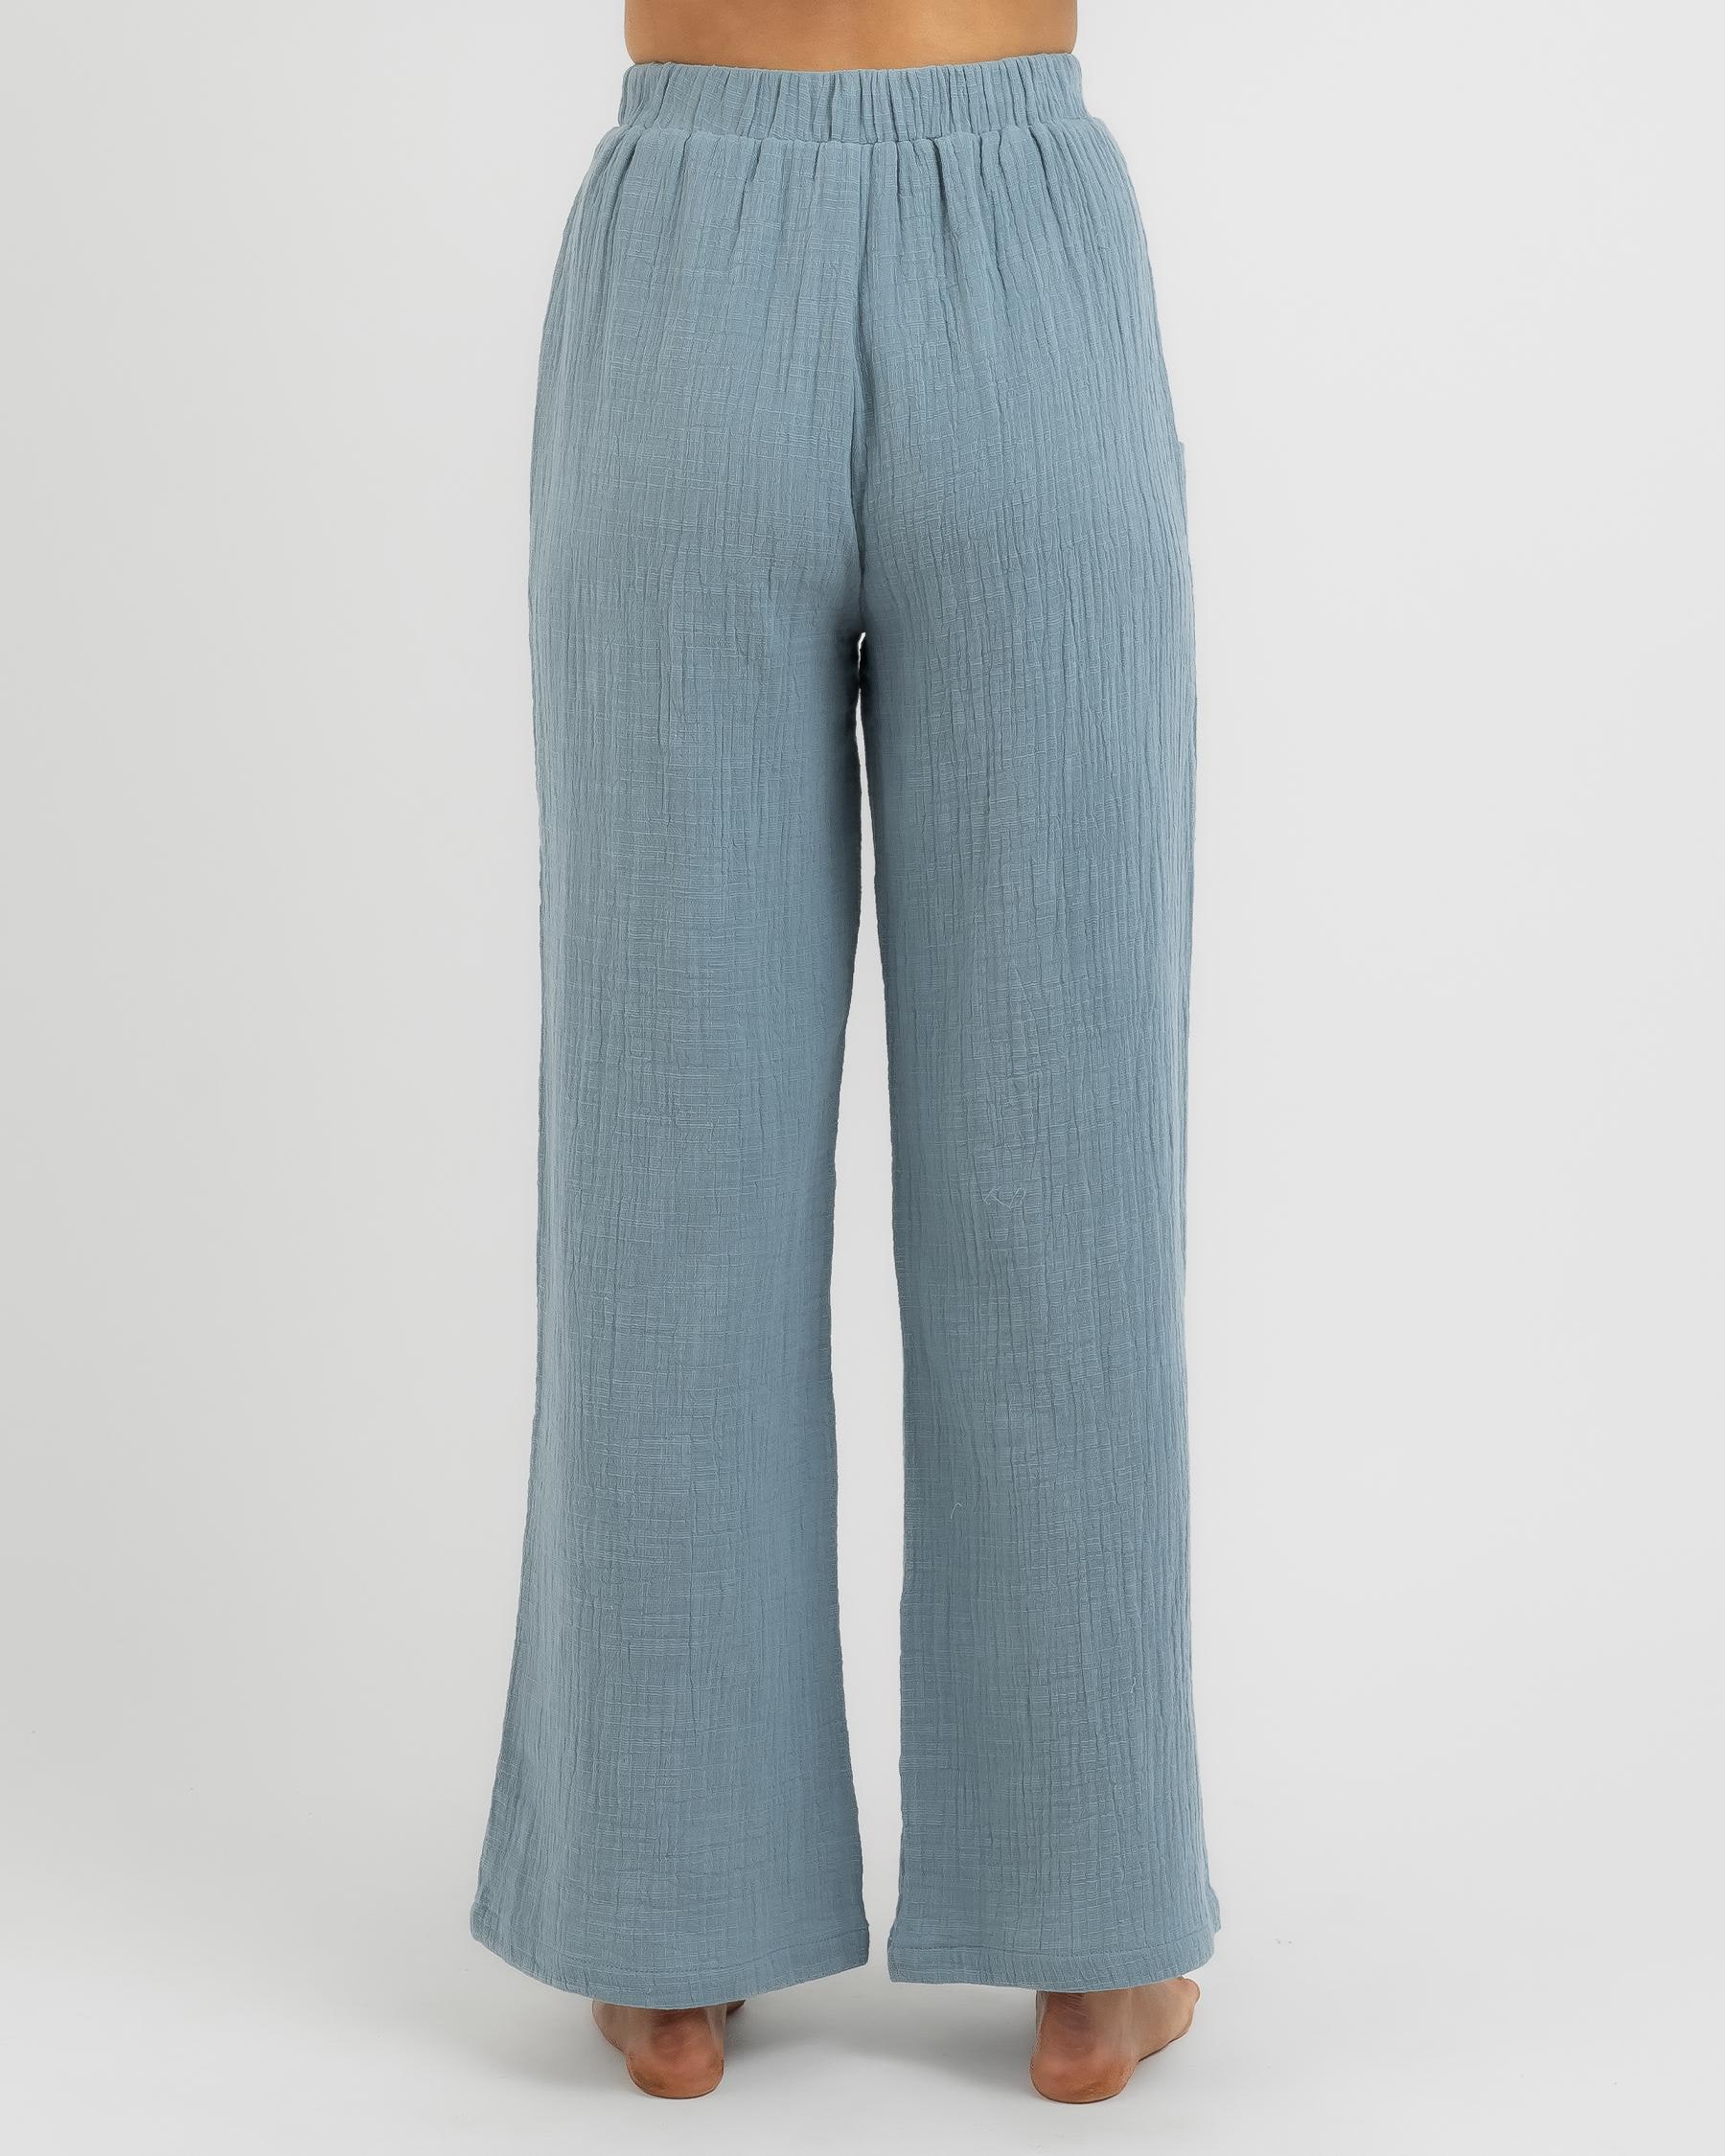 Rusty Somewhere Beach Pants In Dusty Blue - Fast Shipping & Easy ...